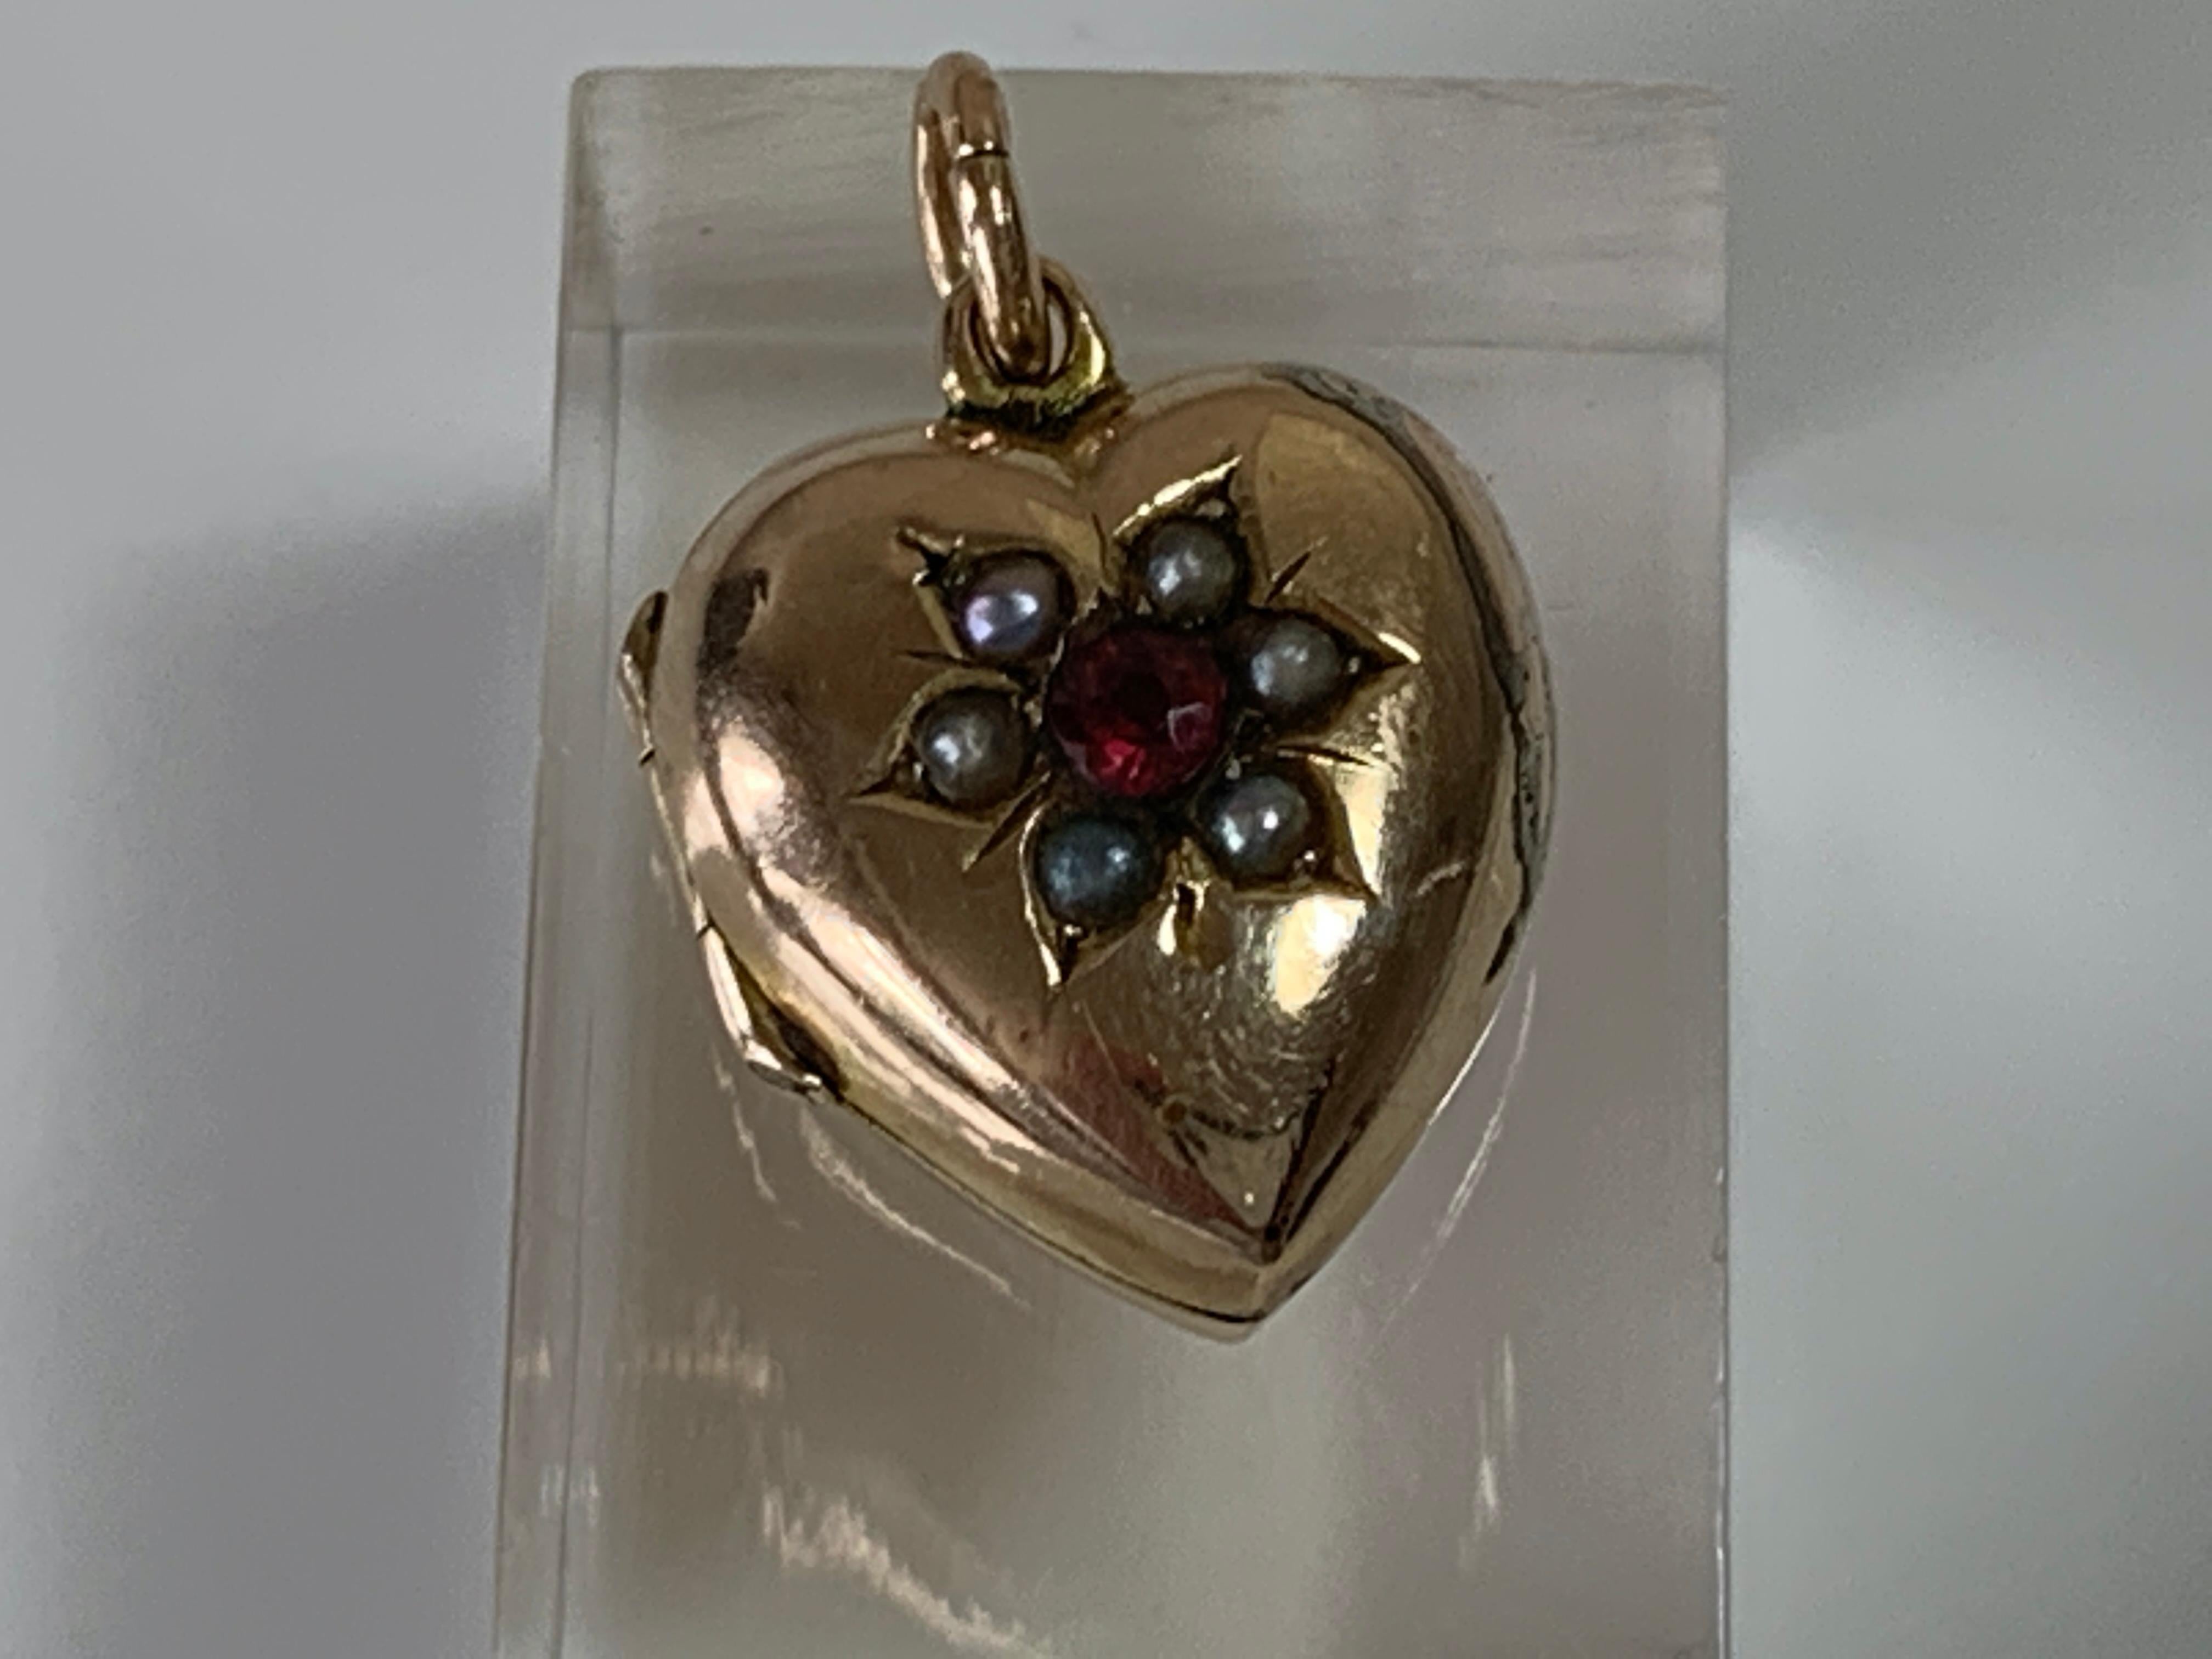 Antique 9ct gold Locket
-snaps shuts securely
Light Blue whole Oil Pearls surround a central bright red gem
Fully Hallmarked on reverse 
Chester Hallmarks -makers AW Date letter P 1898
and on the Ring 9 375
Sold as seen in Images
